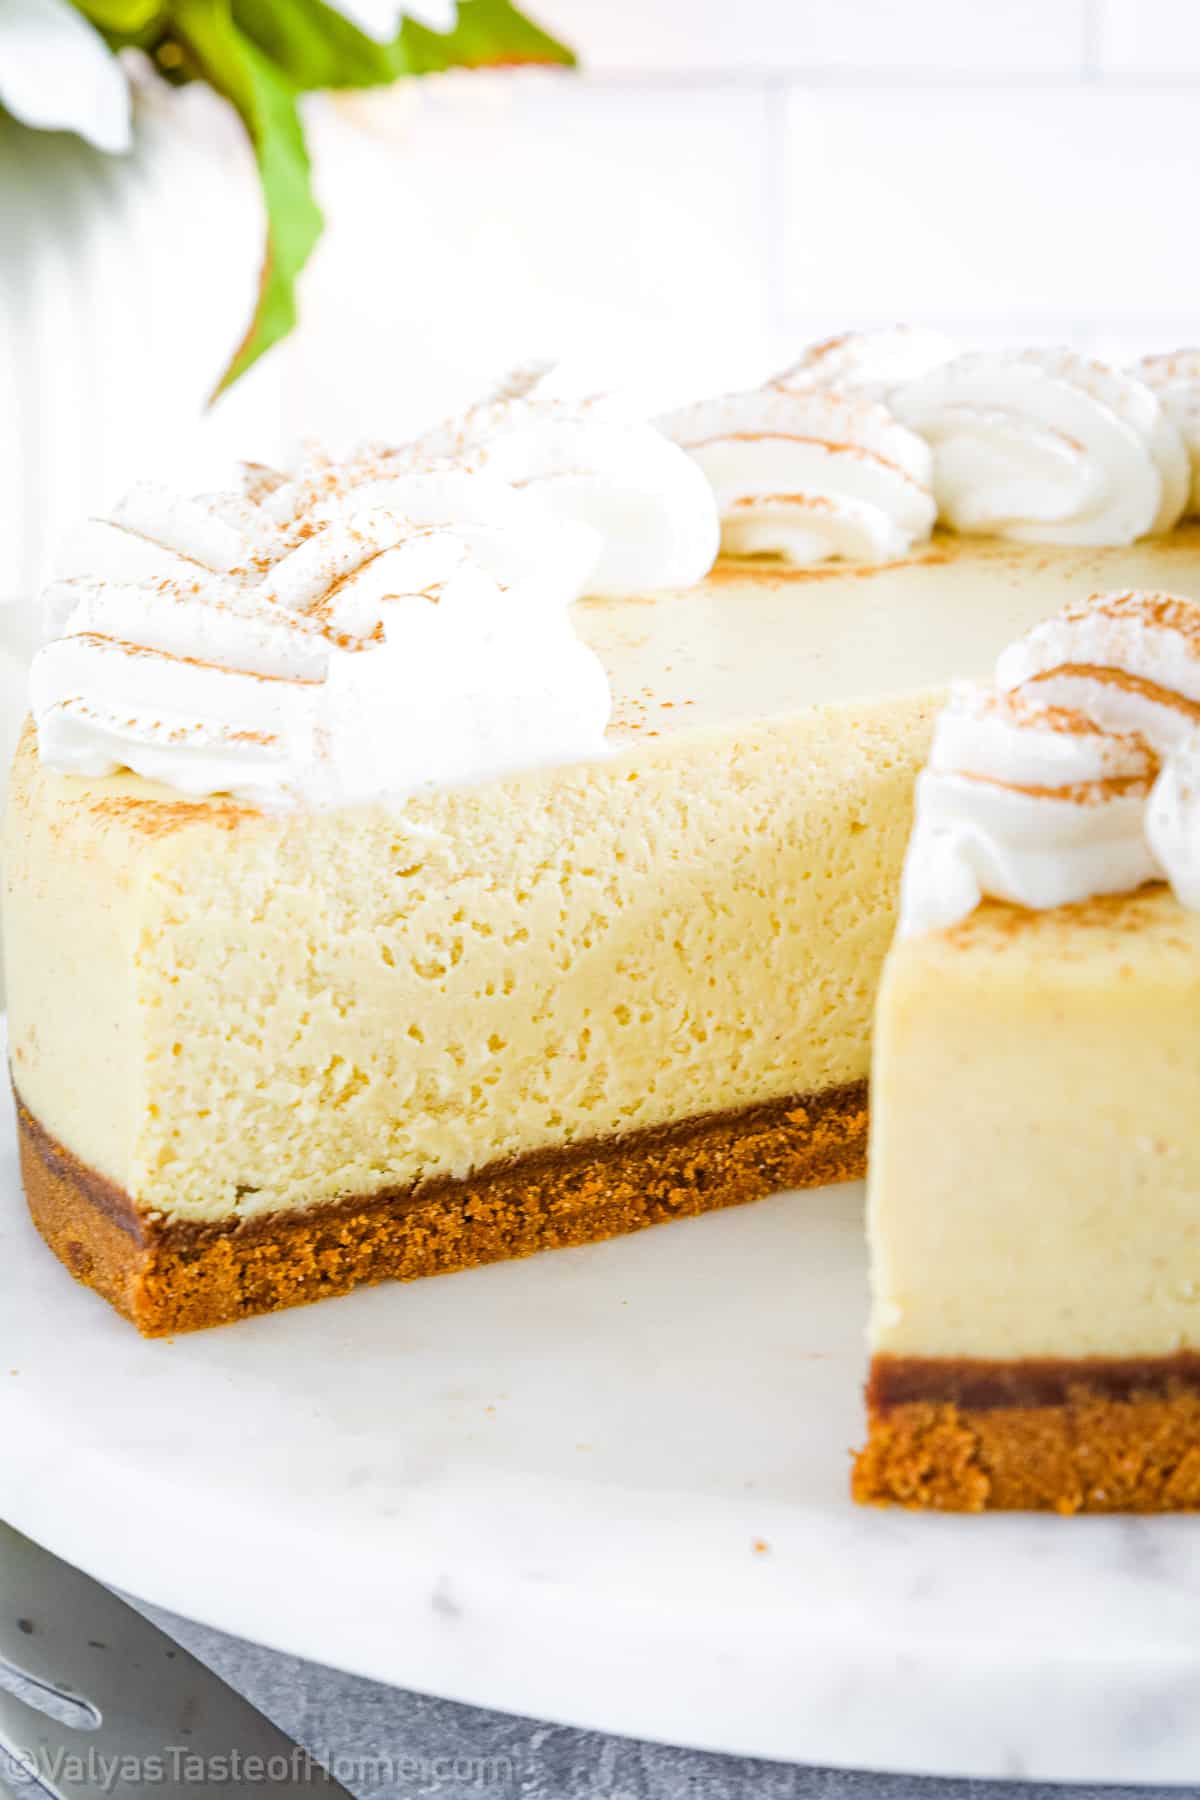 This Pumpkin Pie Cheesecake is a fantastic fusion of two classic desserts, making it a perfect treat for the holiday season or any time you want to indulge.